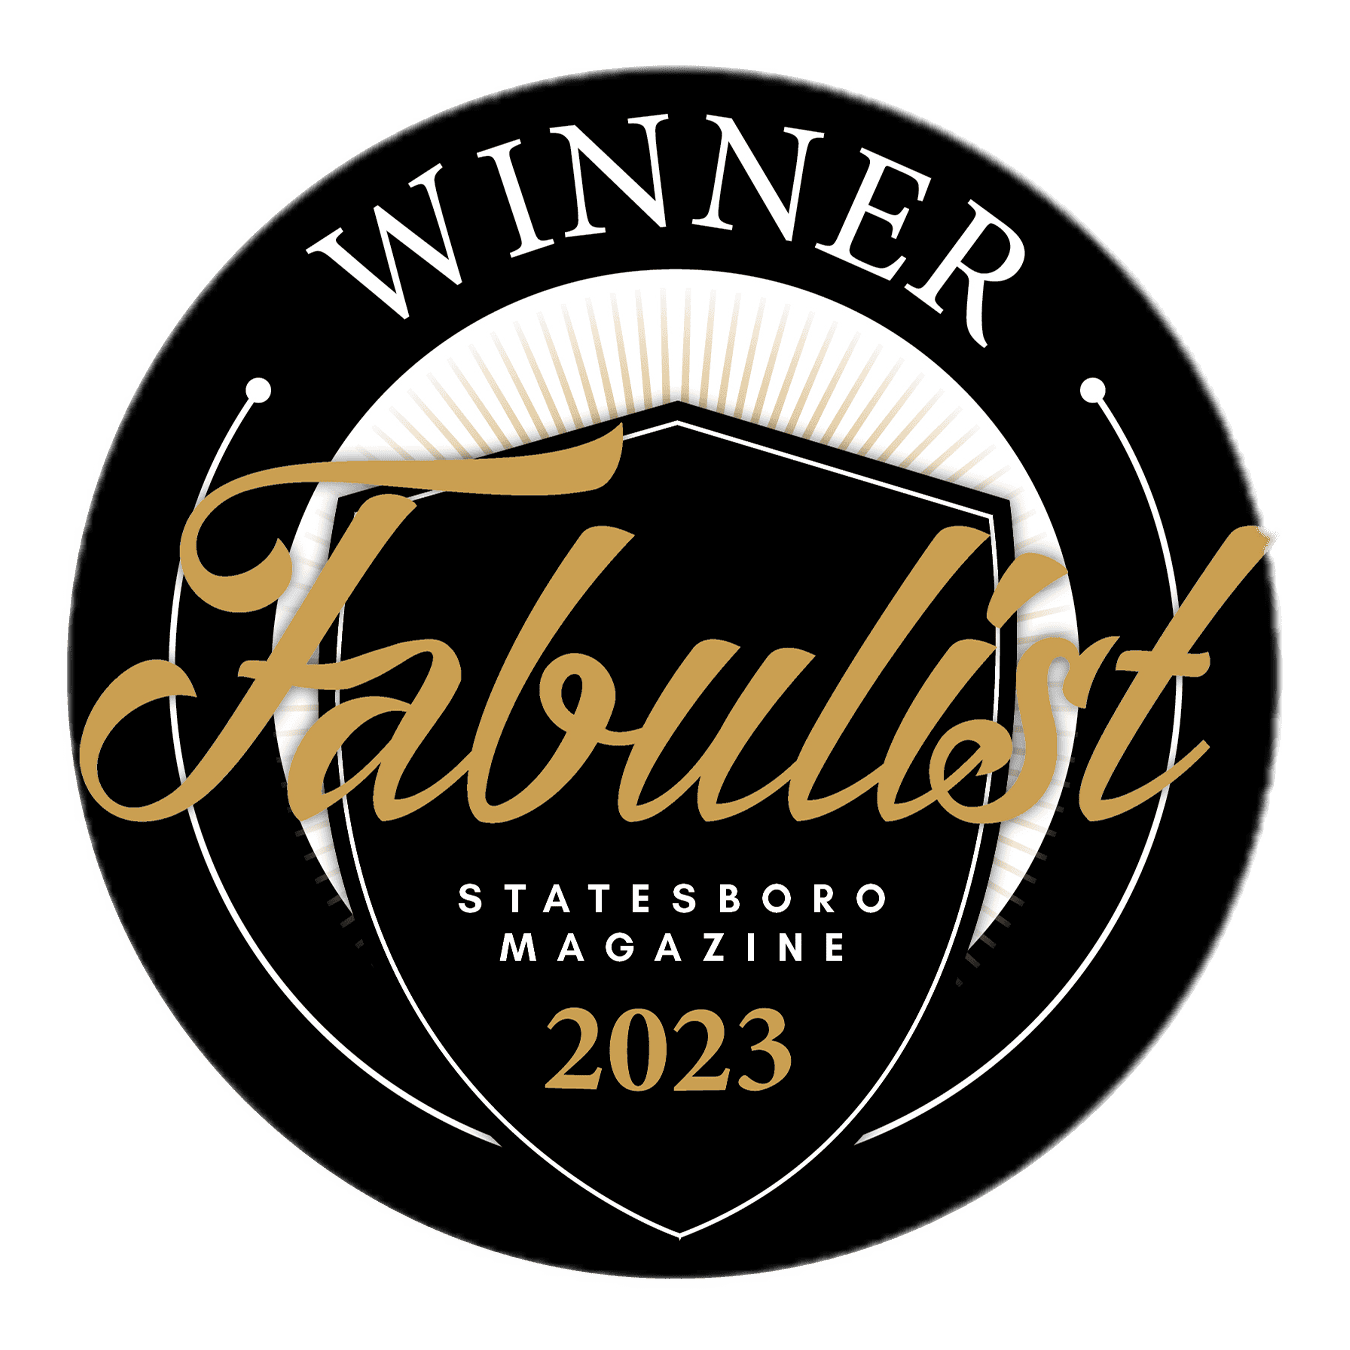 A black circle with gold & white writing for the 2023 Fabulist Magazine Winner emblem is displayed.